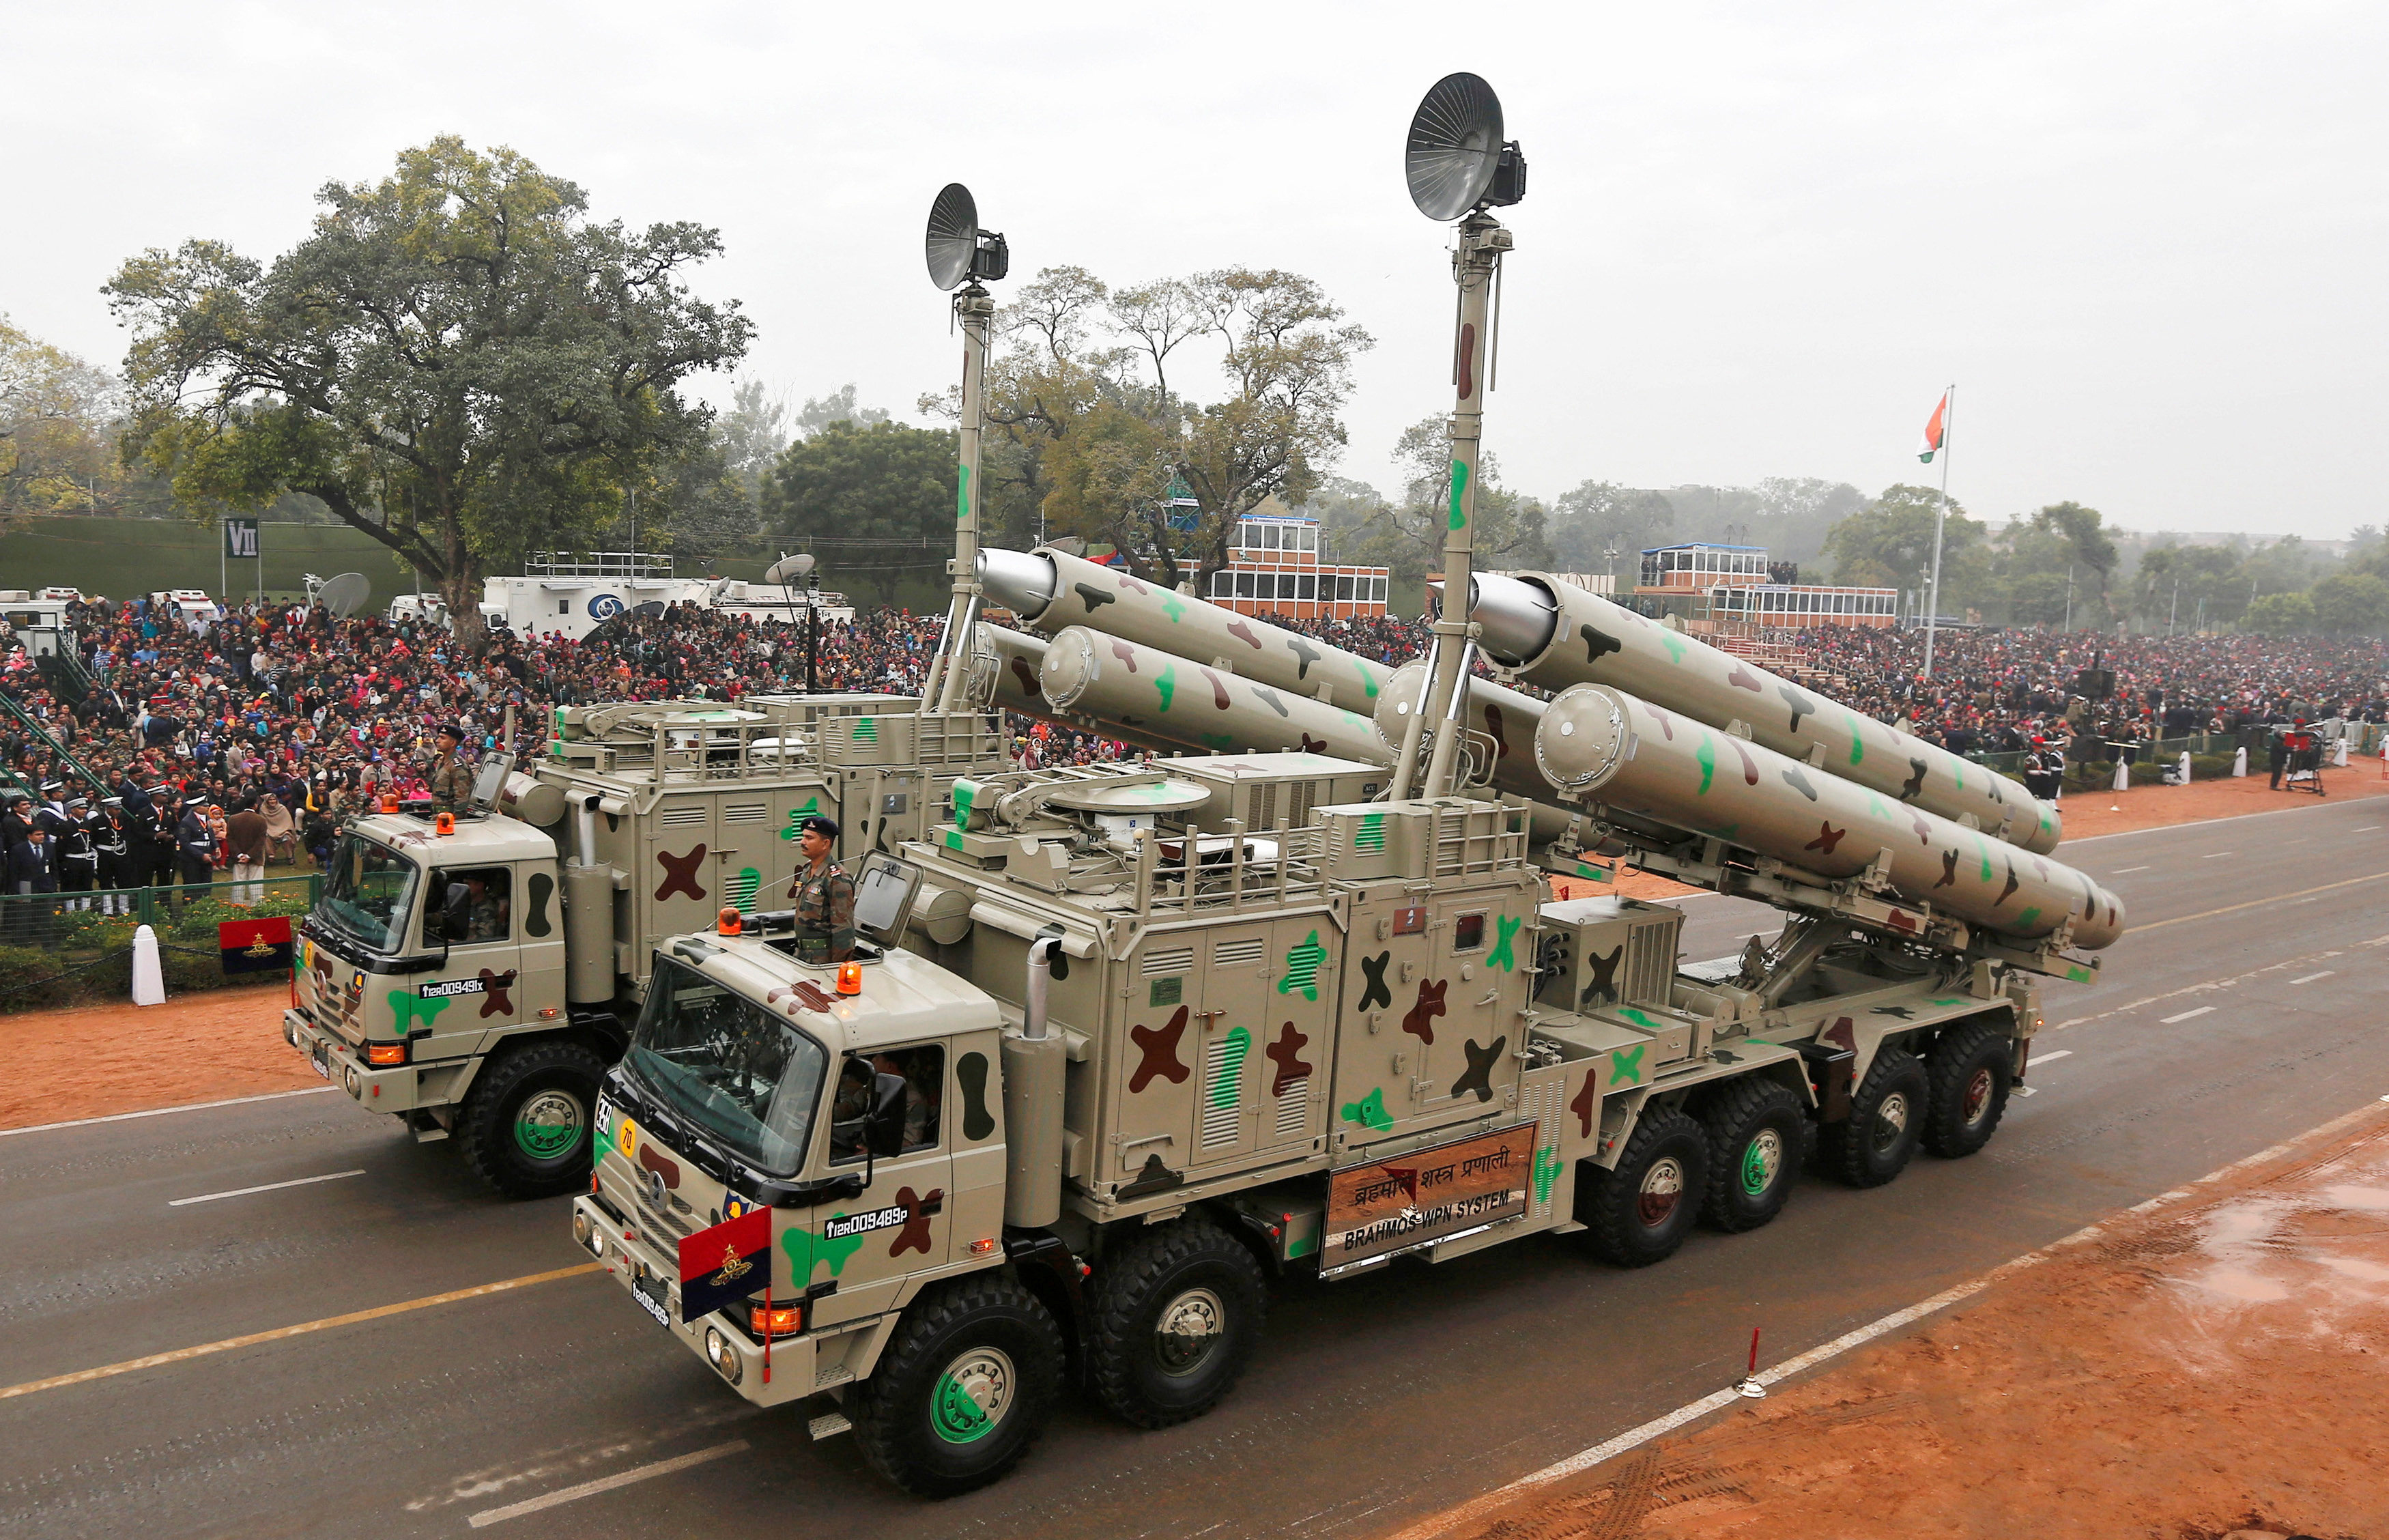 The Indian army’s BrahMos weapon systems is displayed during a Republic Day parade in January 2015. Photo: Reuters